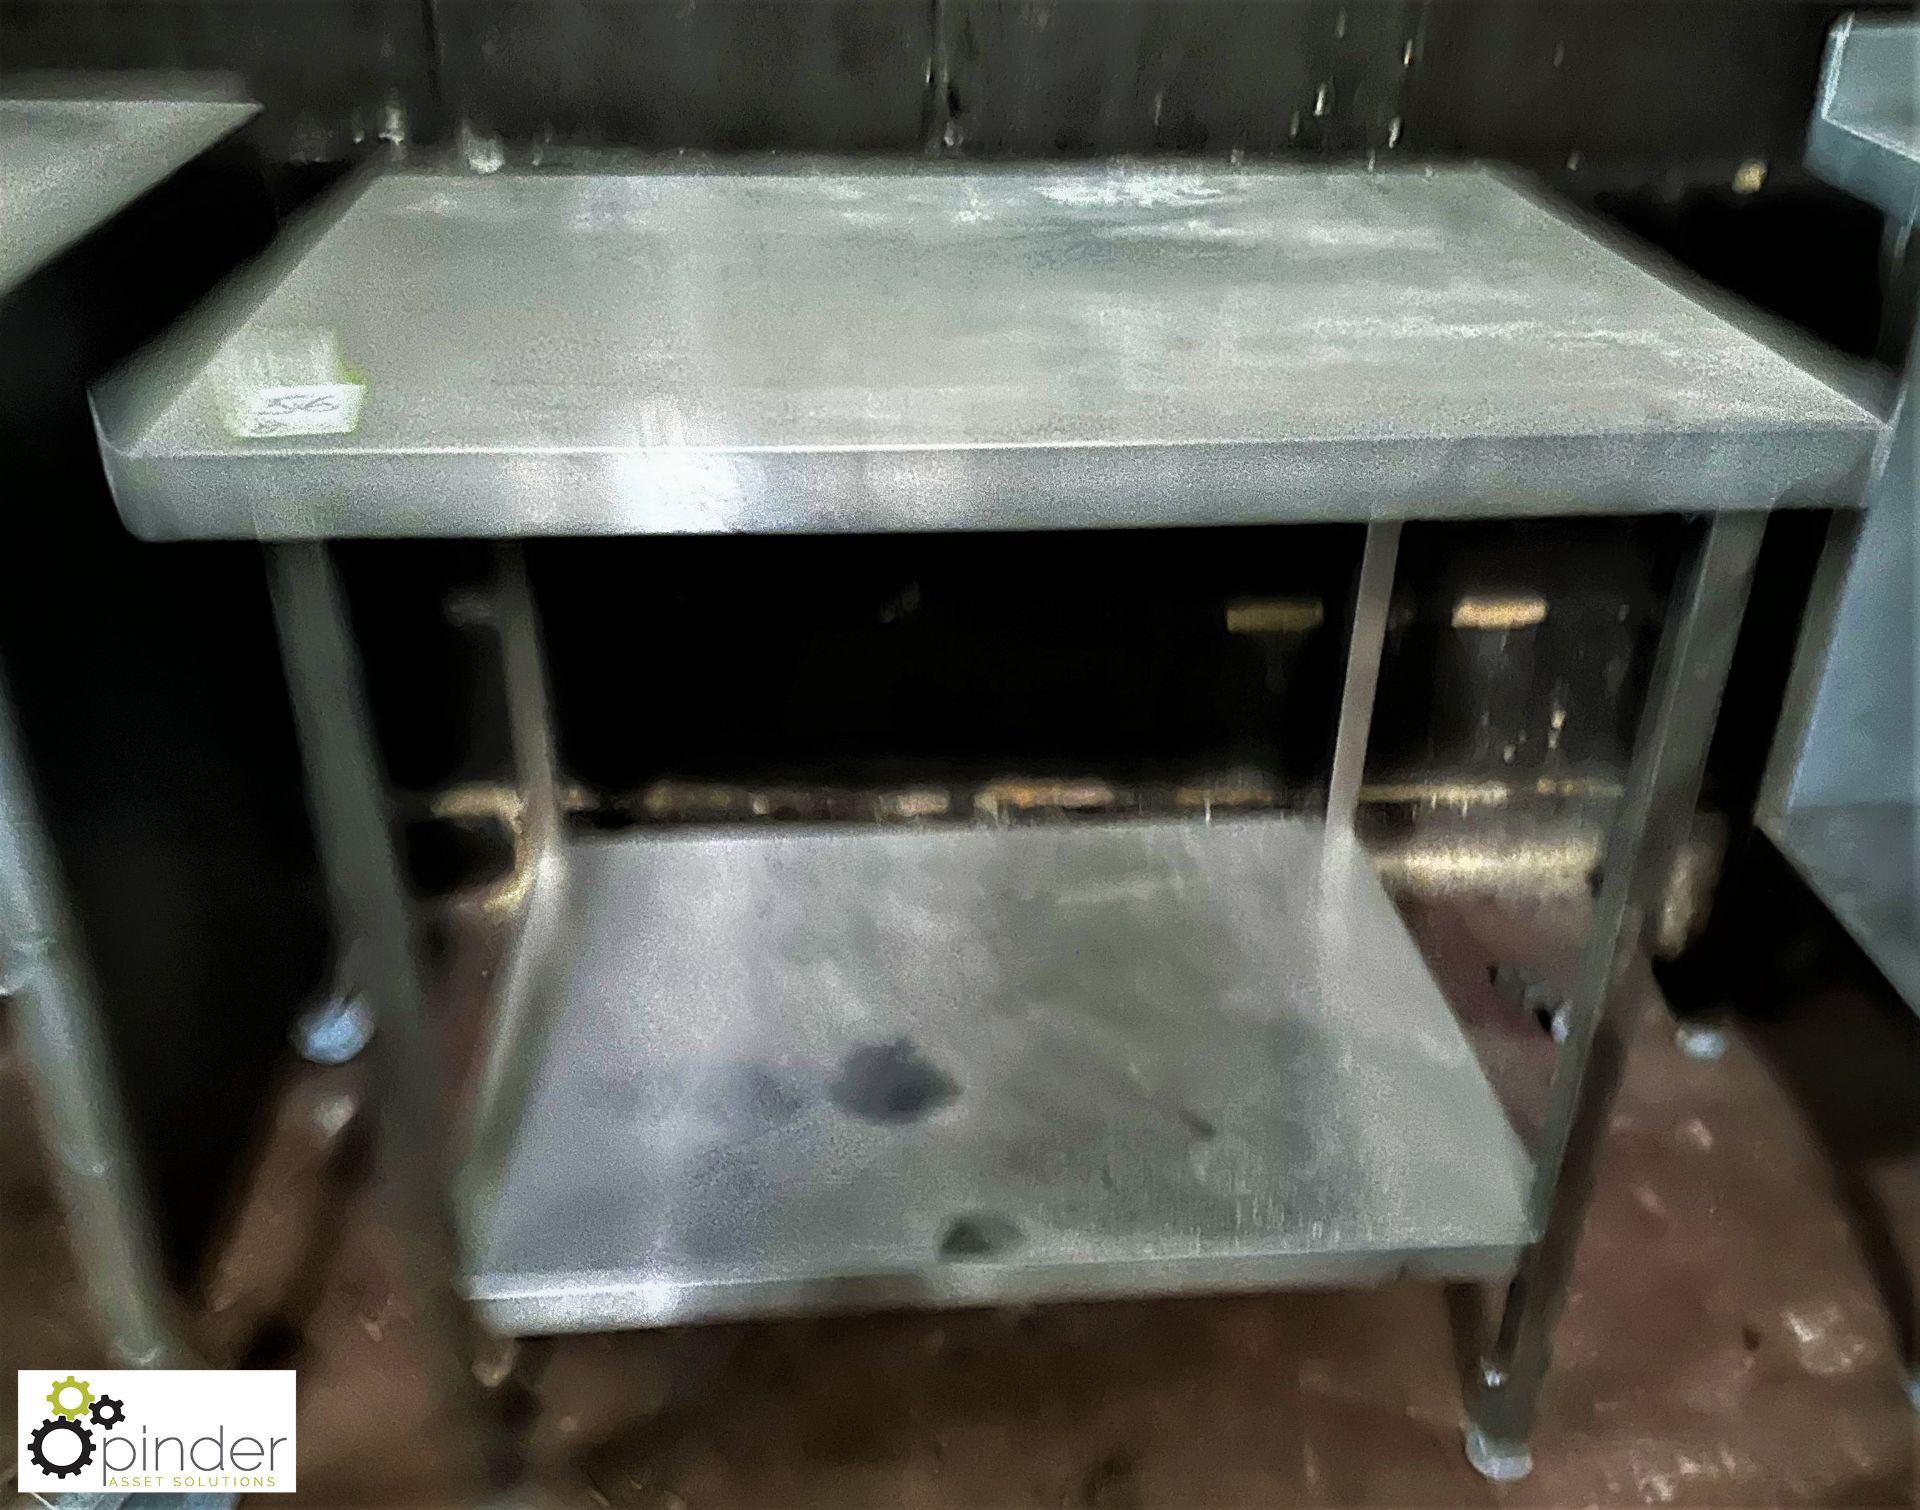 Stainless steel Preparation Table, 900mm x 650mm x 830mm, with under shelf